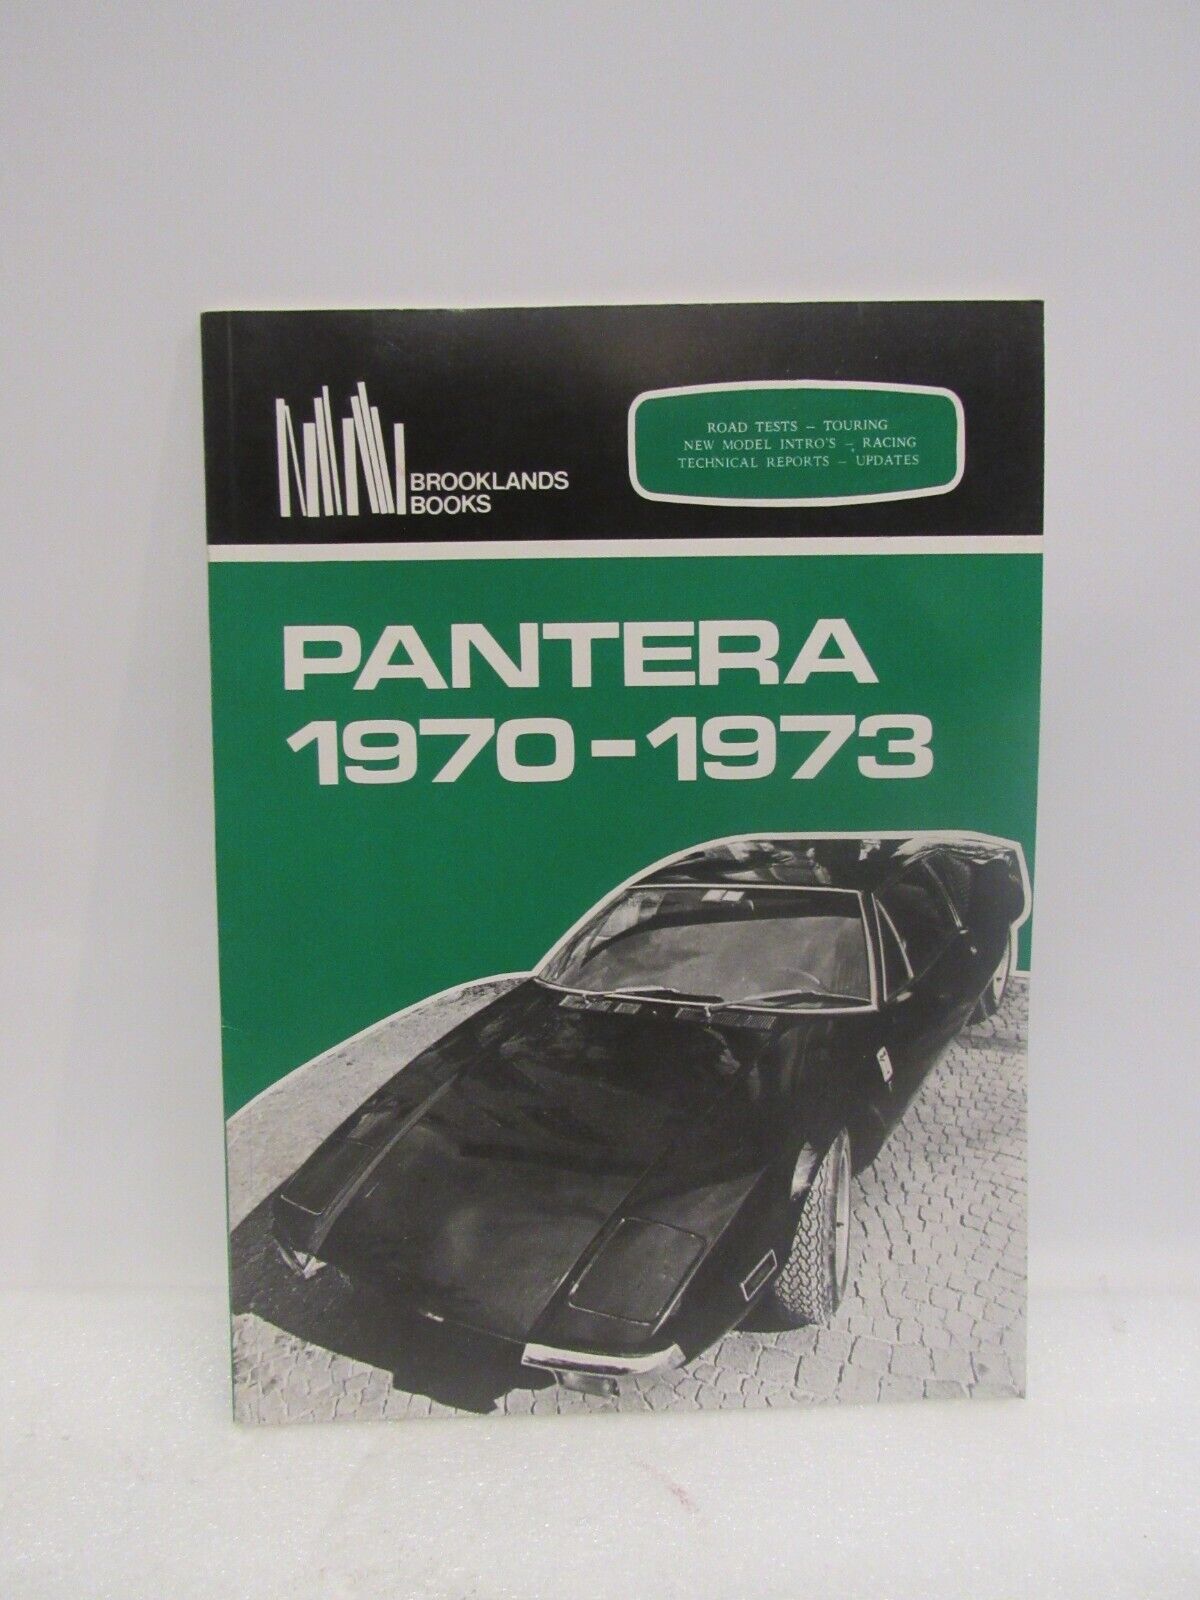 Vintage Pantera Ford 1970-1973 Brooklands Models Overview Collectible Booklet